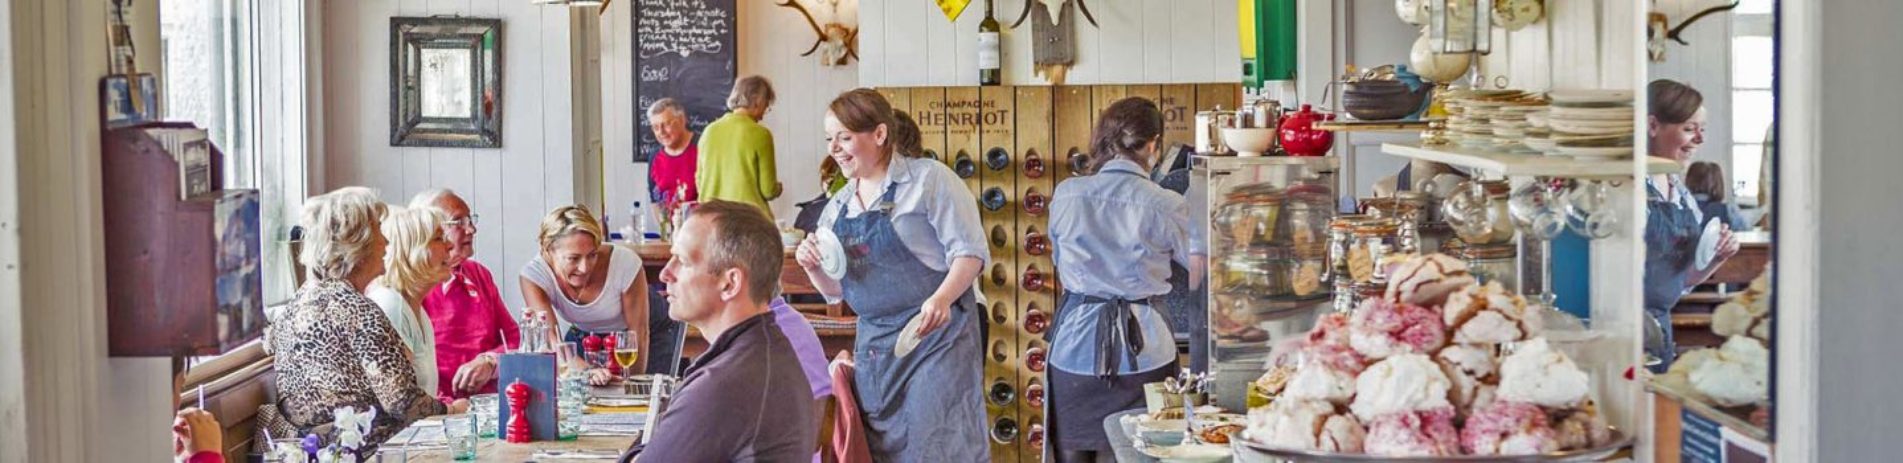 mhor-eighty-four-restaurant-interior-meringues-visible-on-plate-on-right-and-smiling-waitress-attending-to-table-of-men-and-women-on-left-everything-is-very-colourful